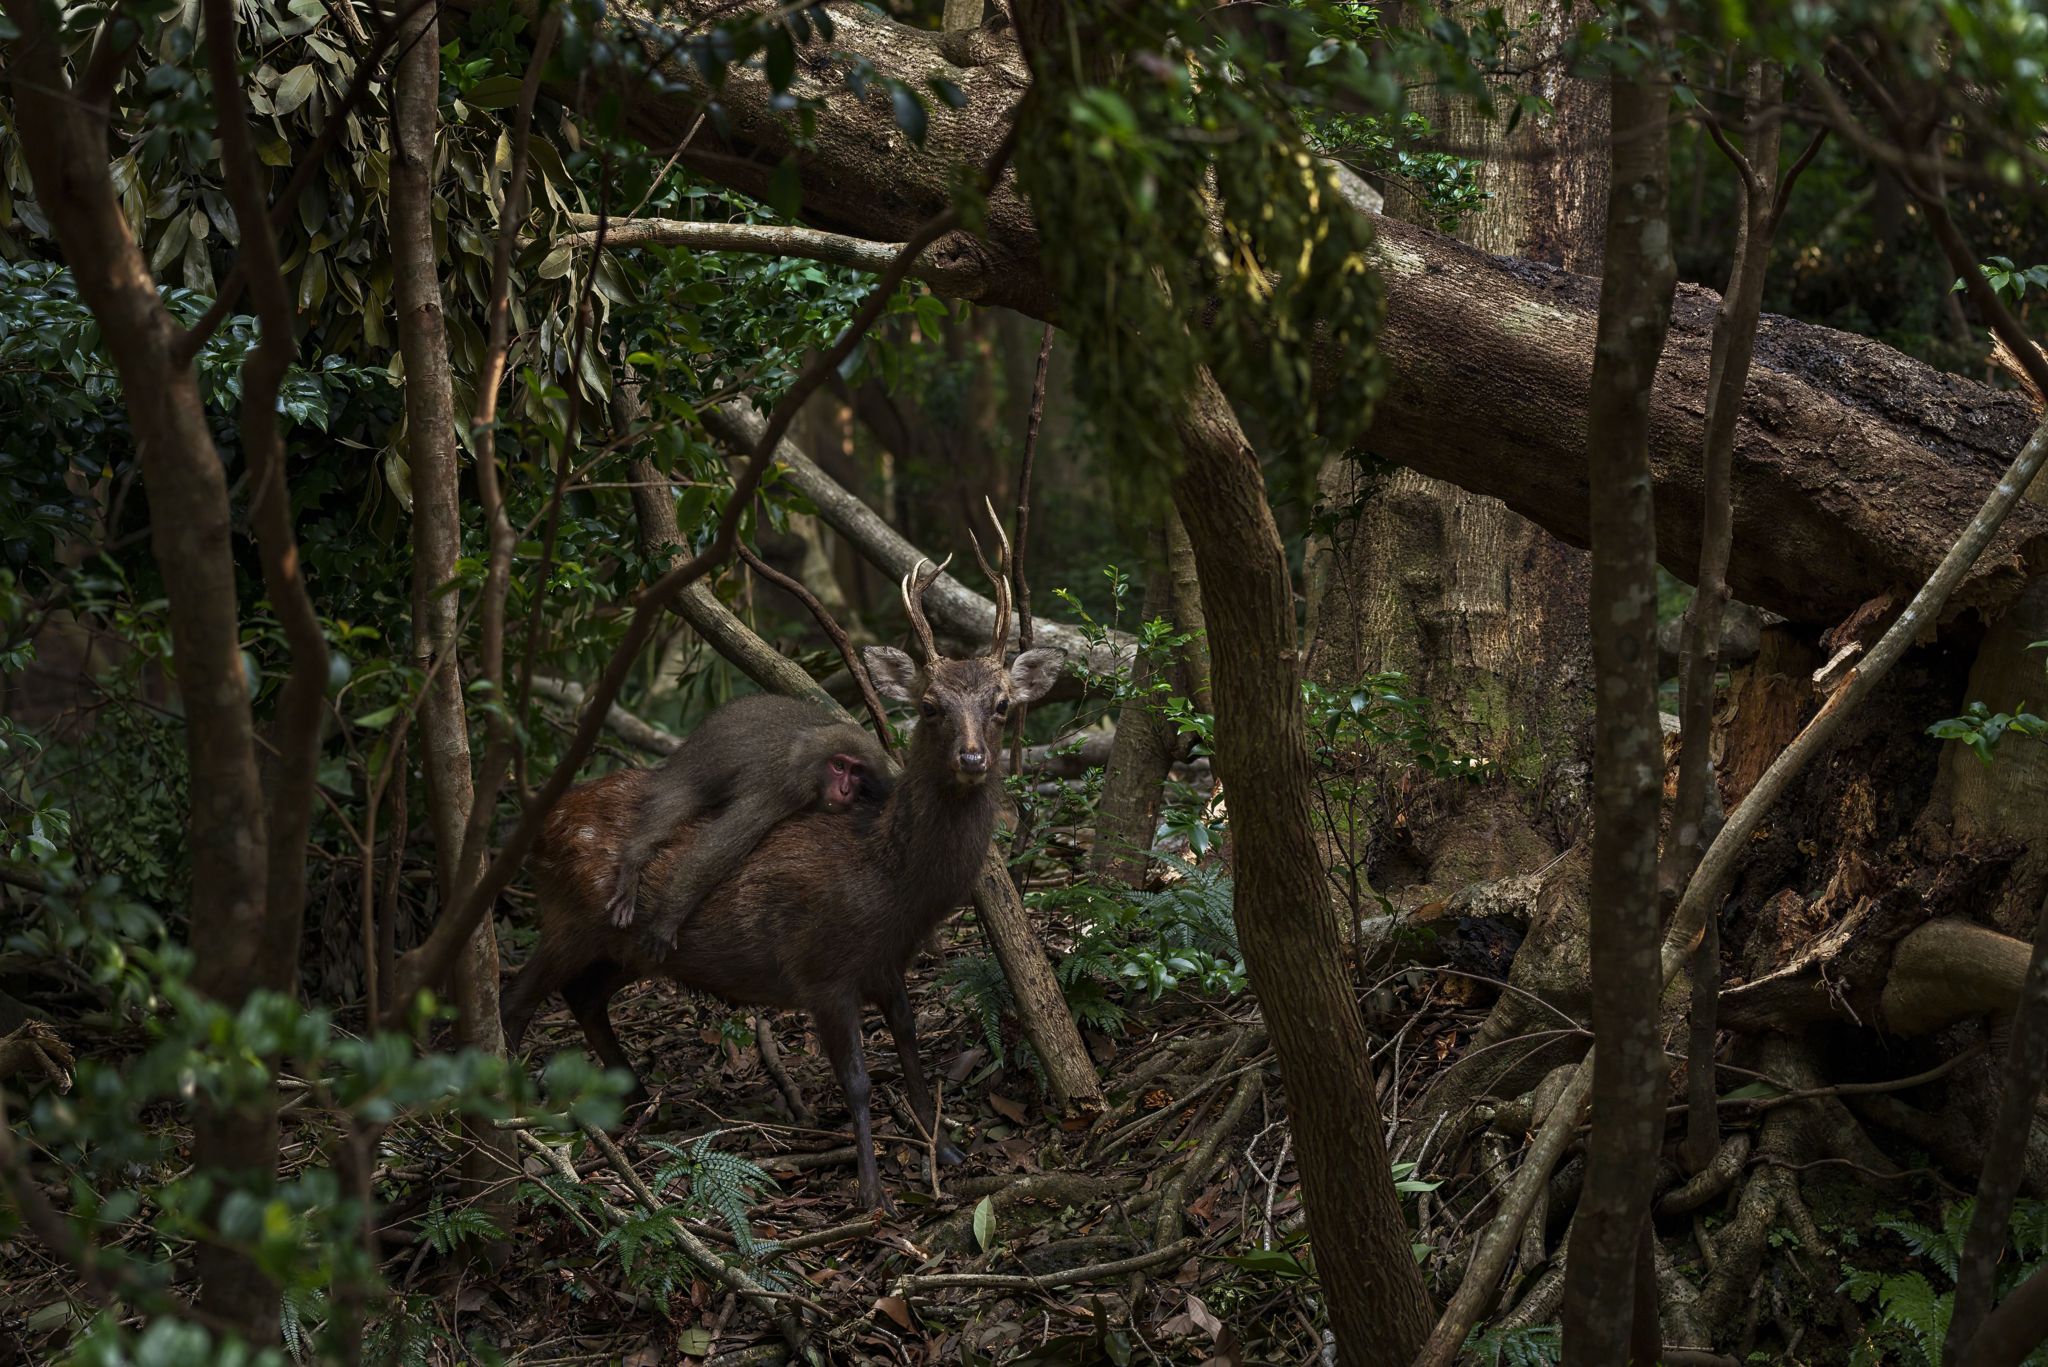 a young Yakushima macaque riding on a deer’s back